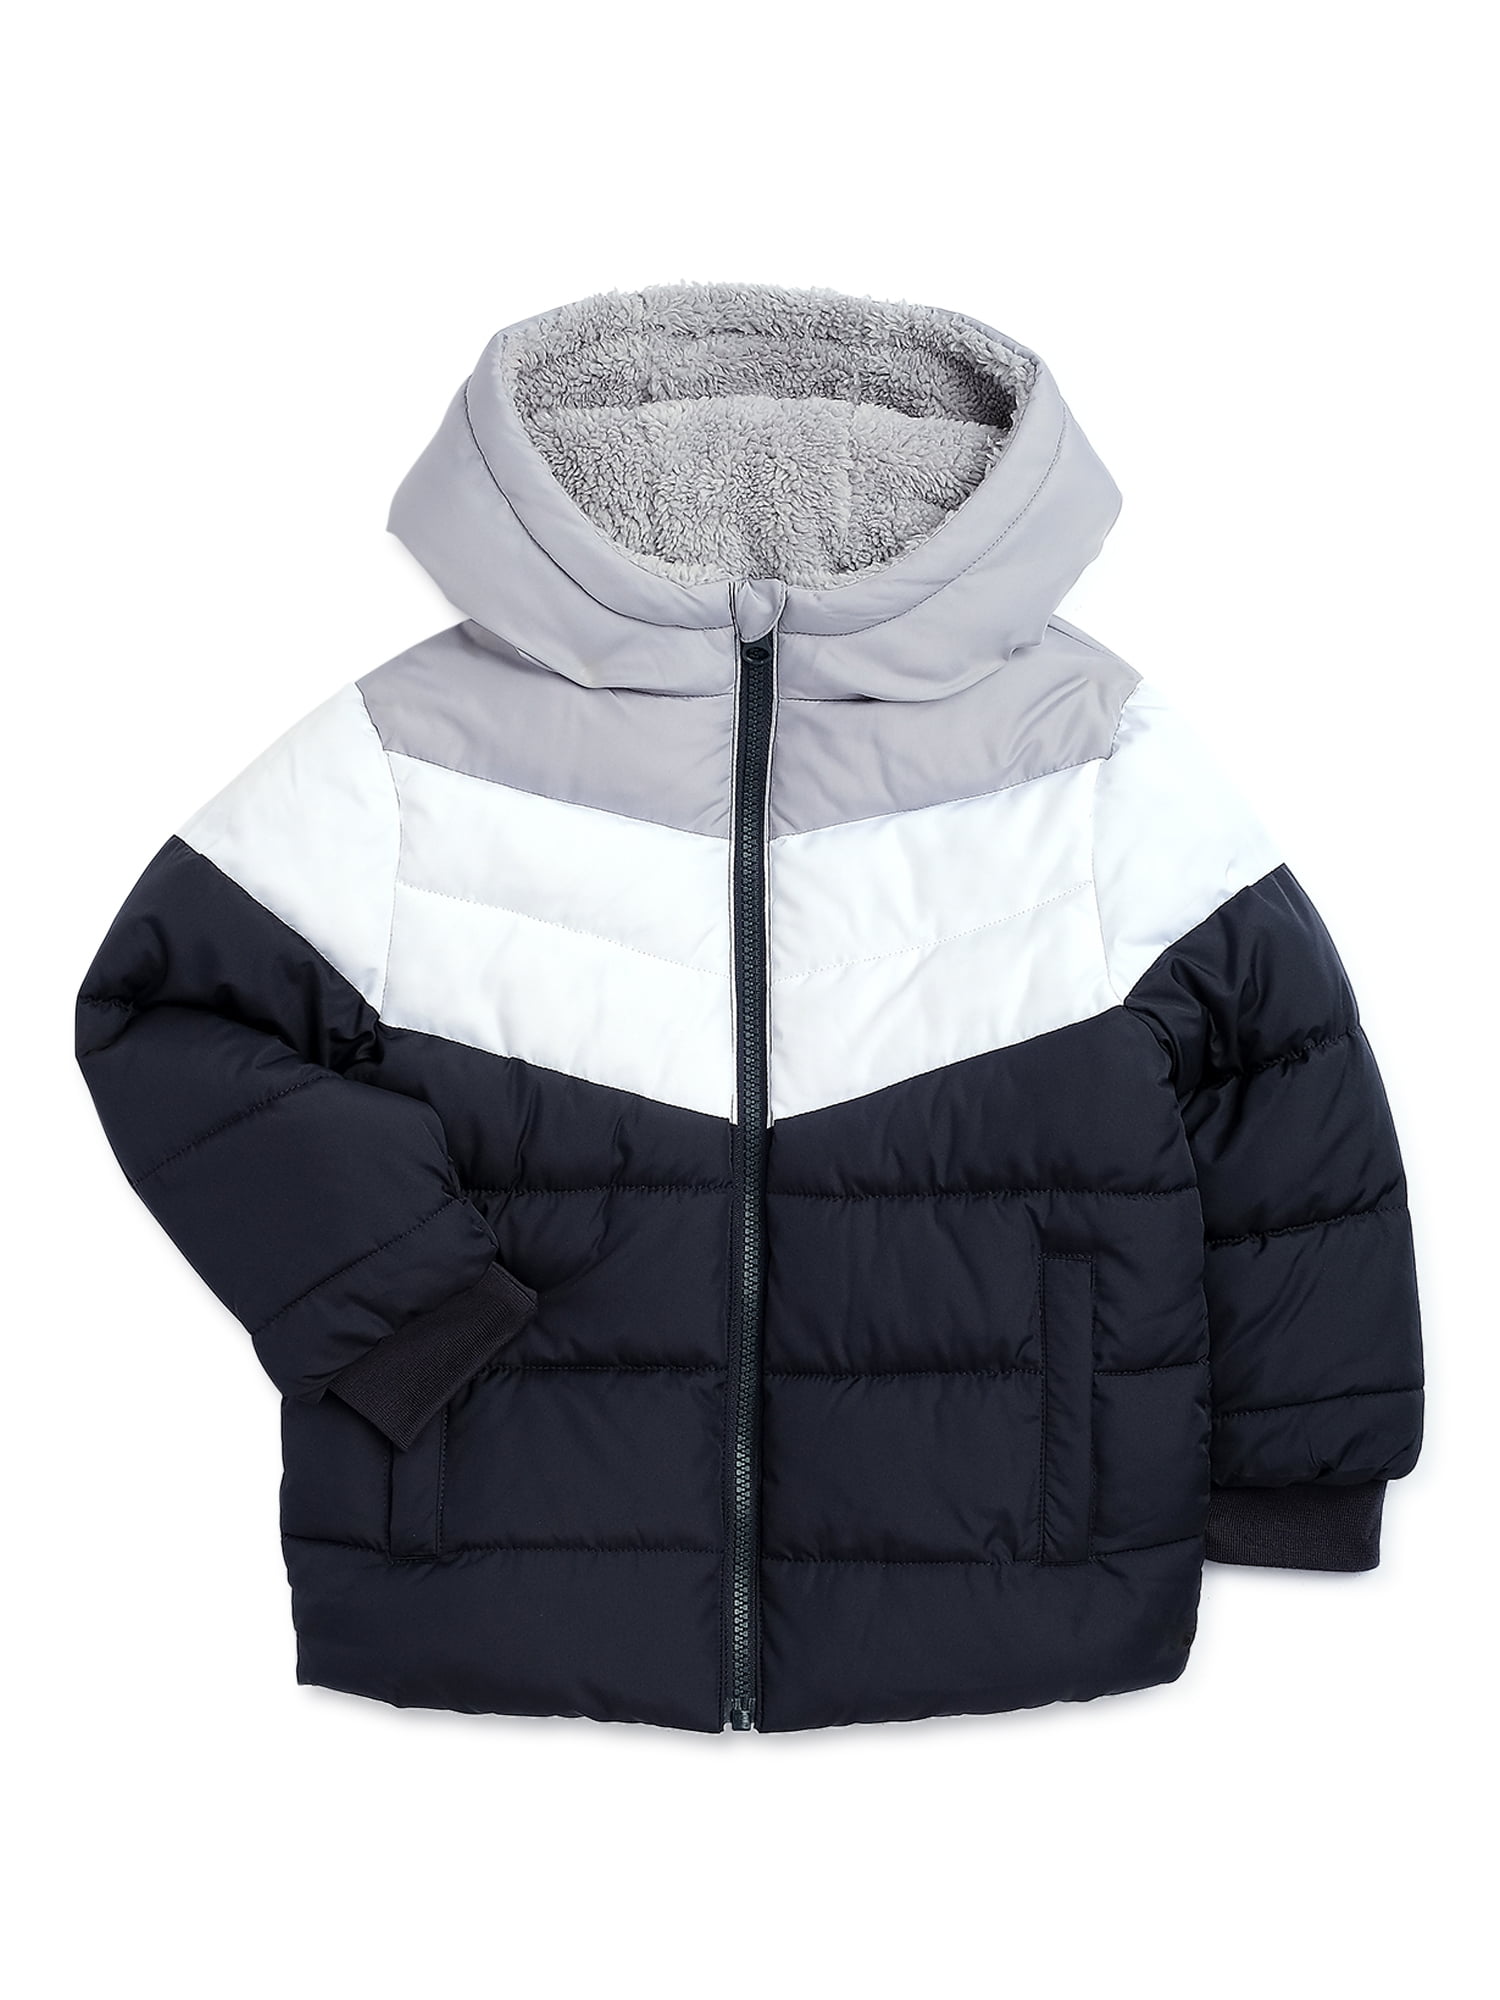 Swiss Tech Baby and Toddler Boys Heavyweight Puffer Jacket, Sizes 12M-5T